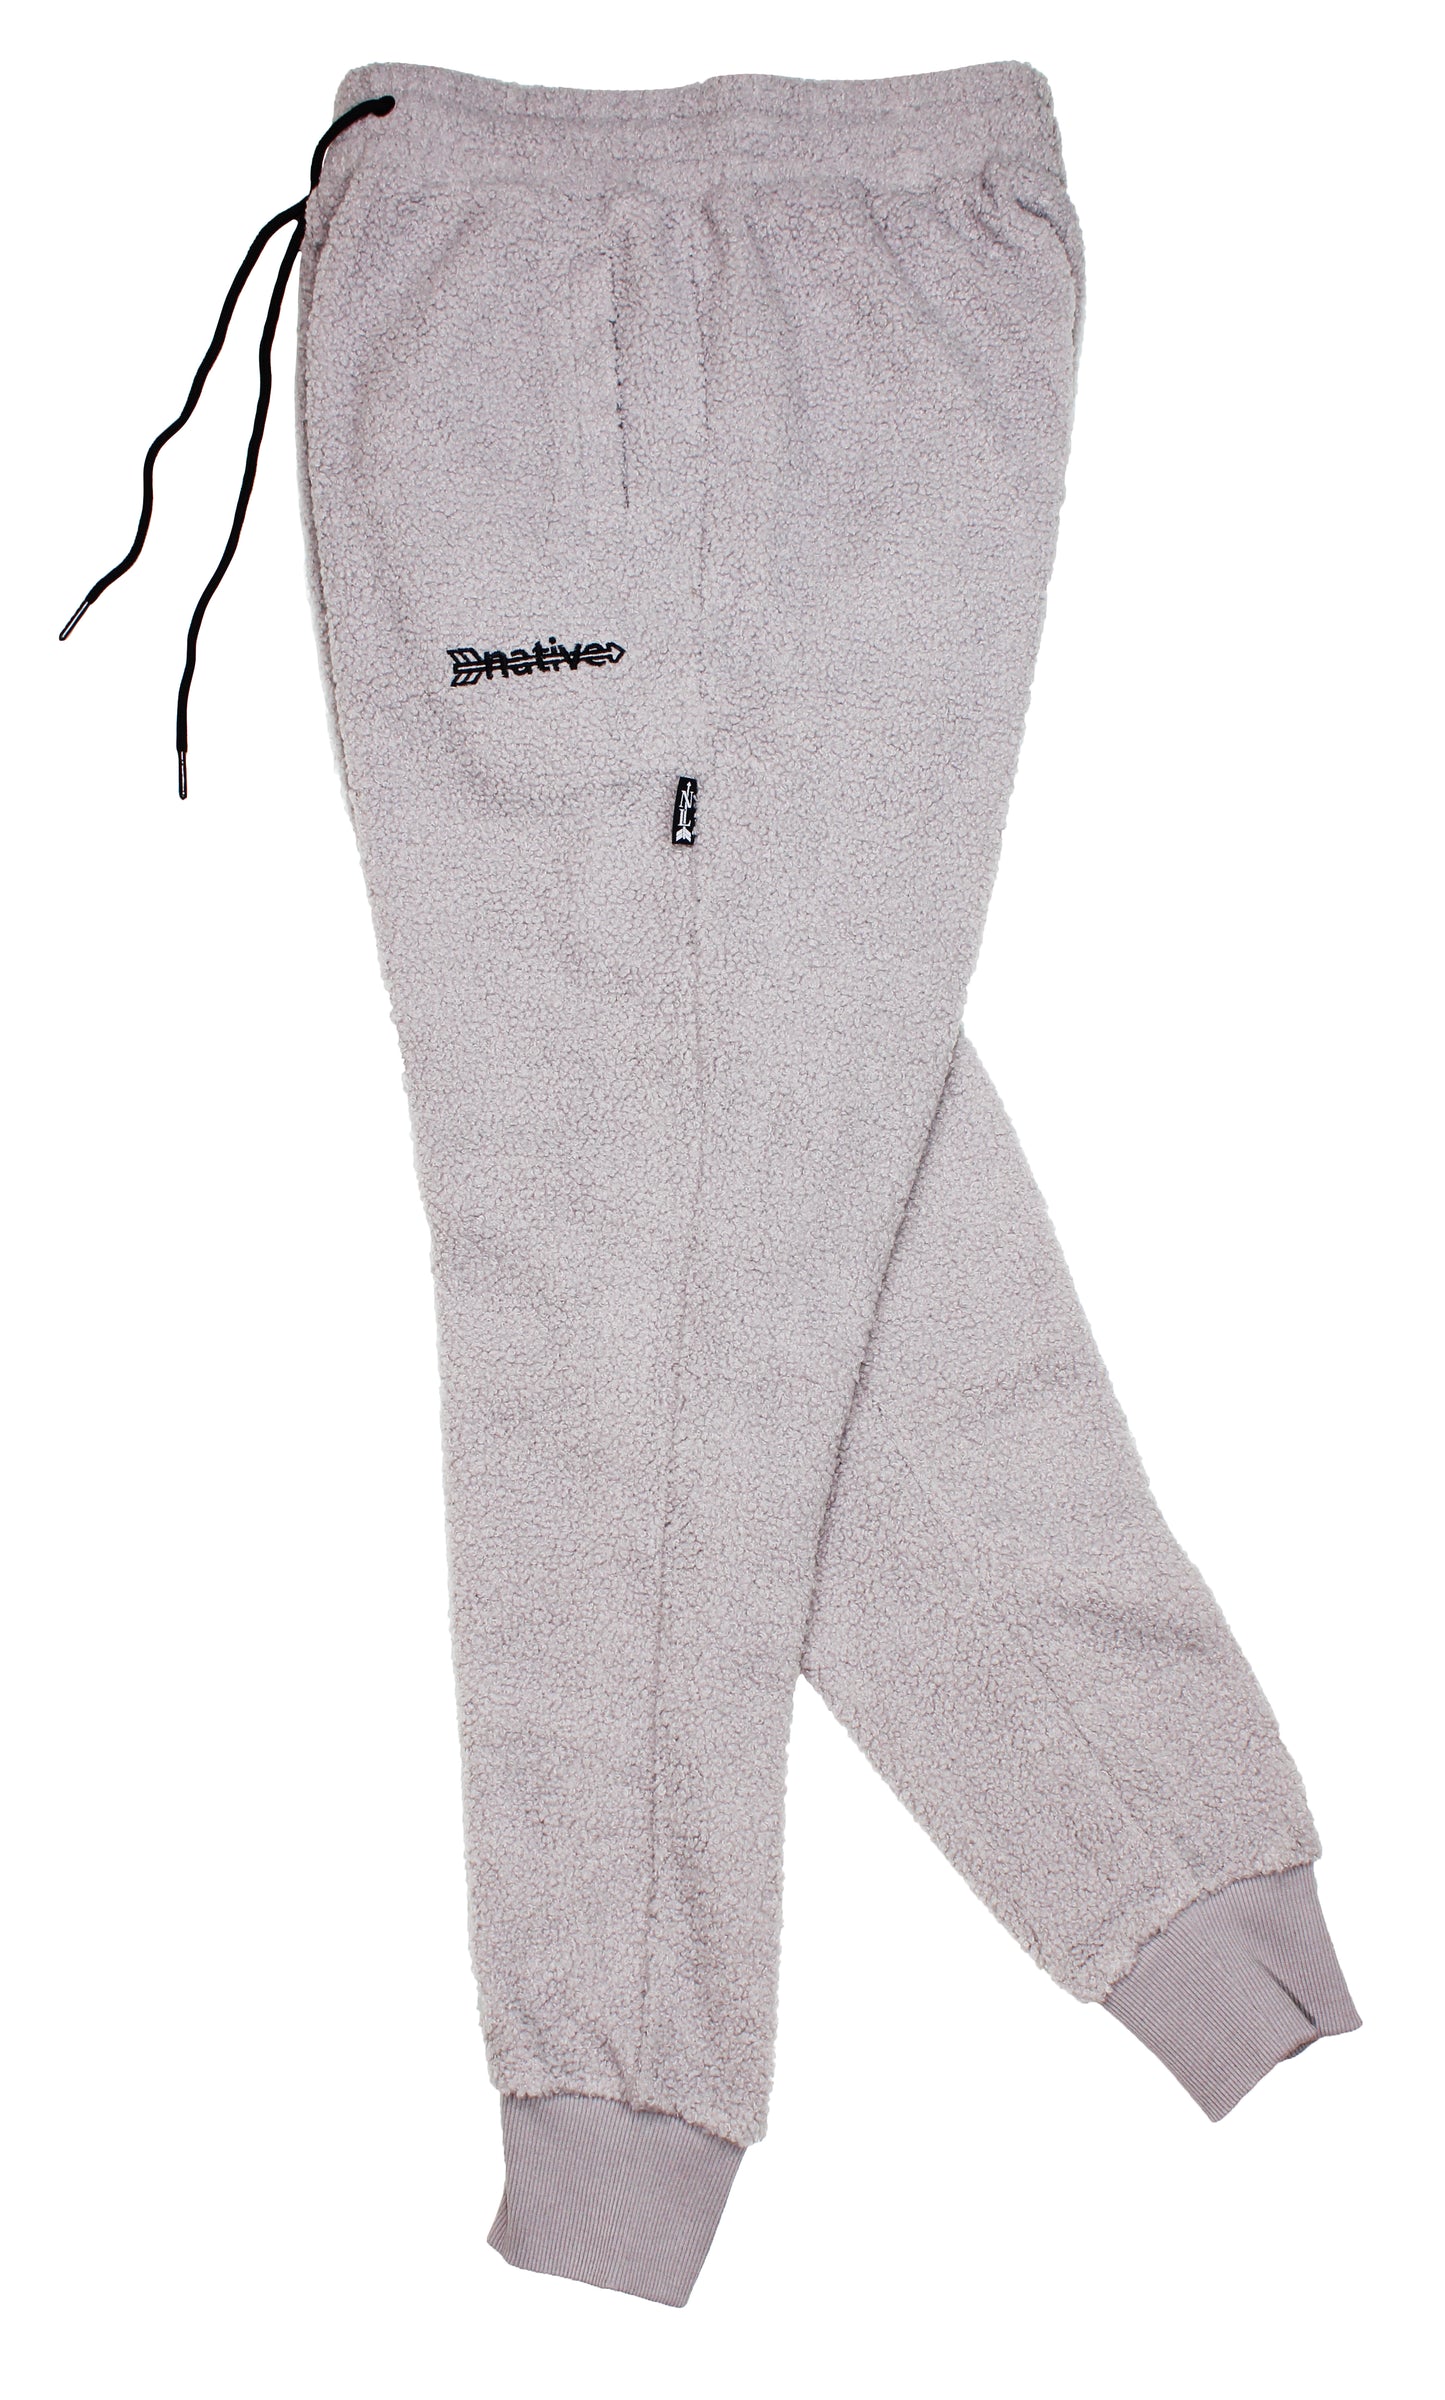 sherpa joggers in heather gray